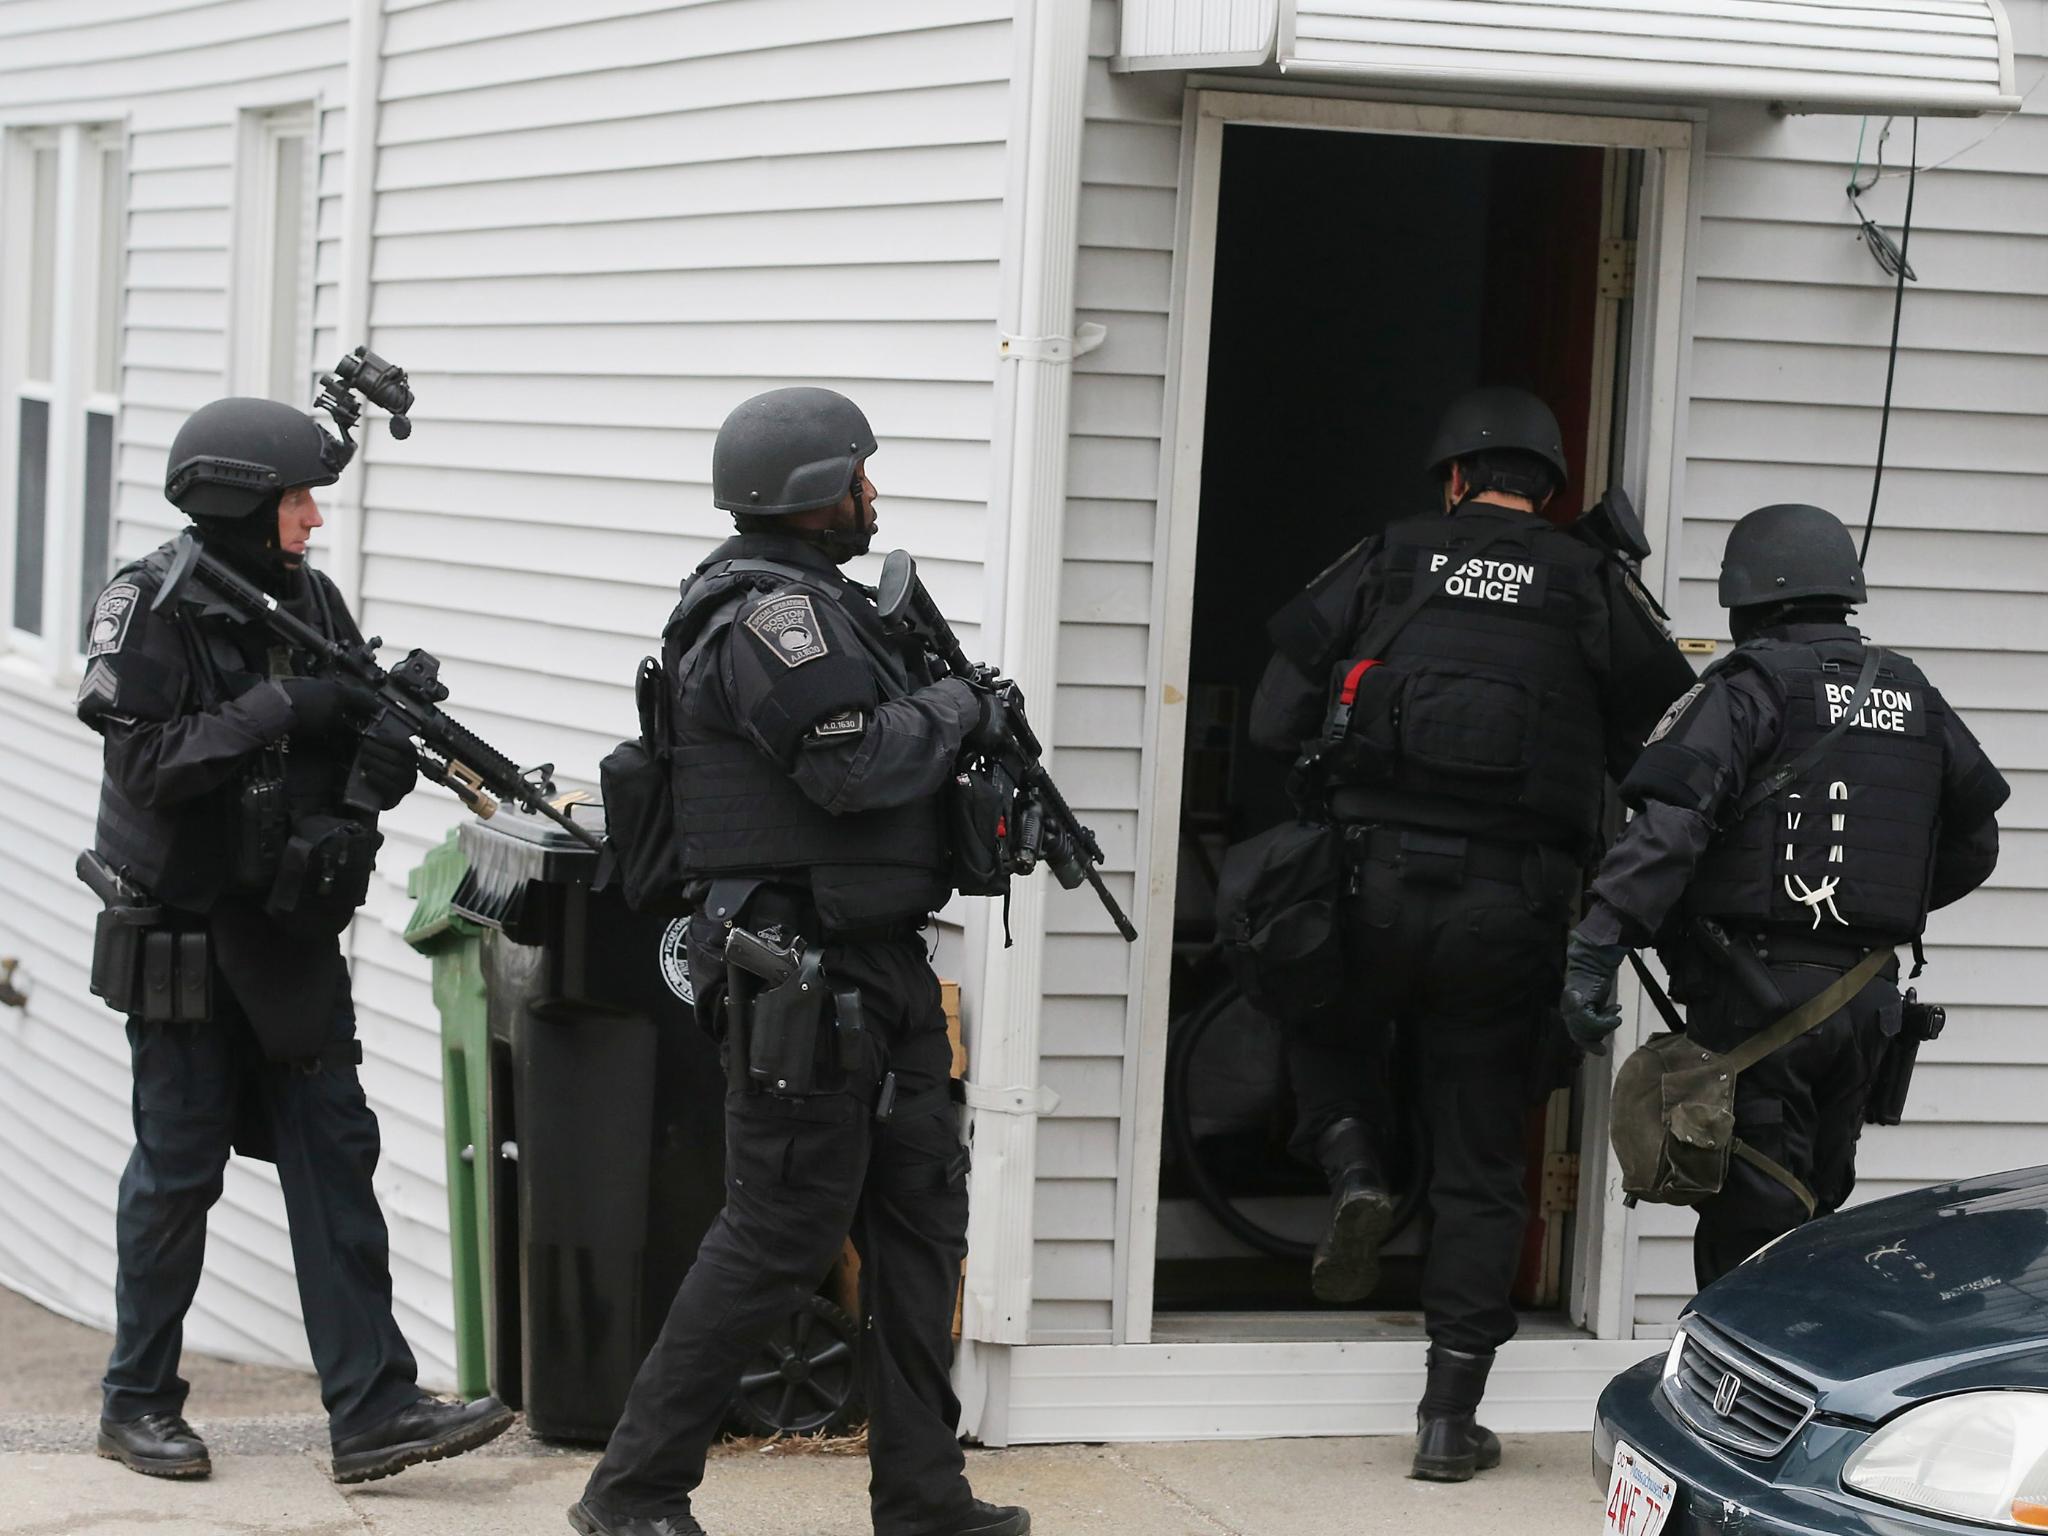 SWAT team members enter a residential building in Watertown, Massachusetts. A similar type of police team showed up at the Reeves' home on 15 July 2017.